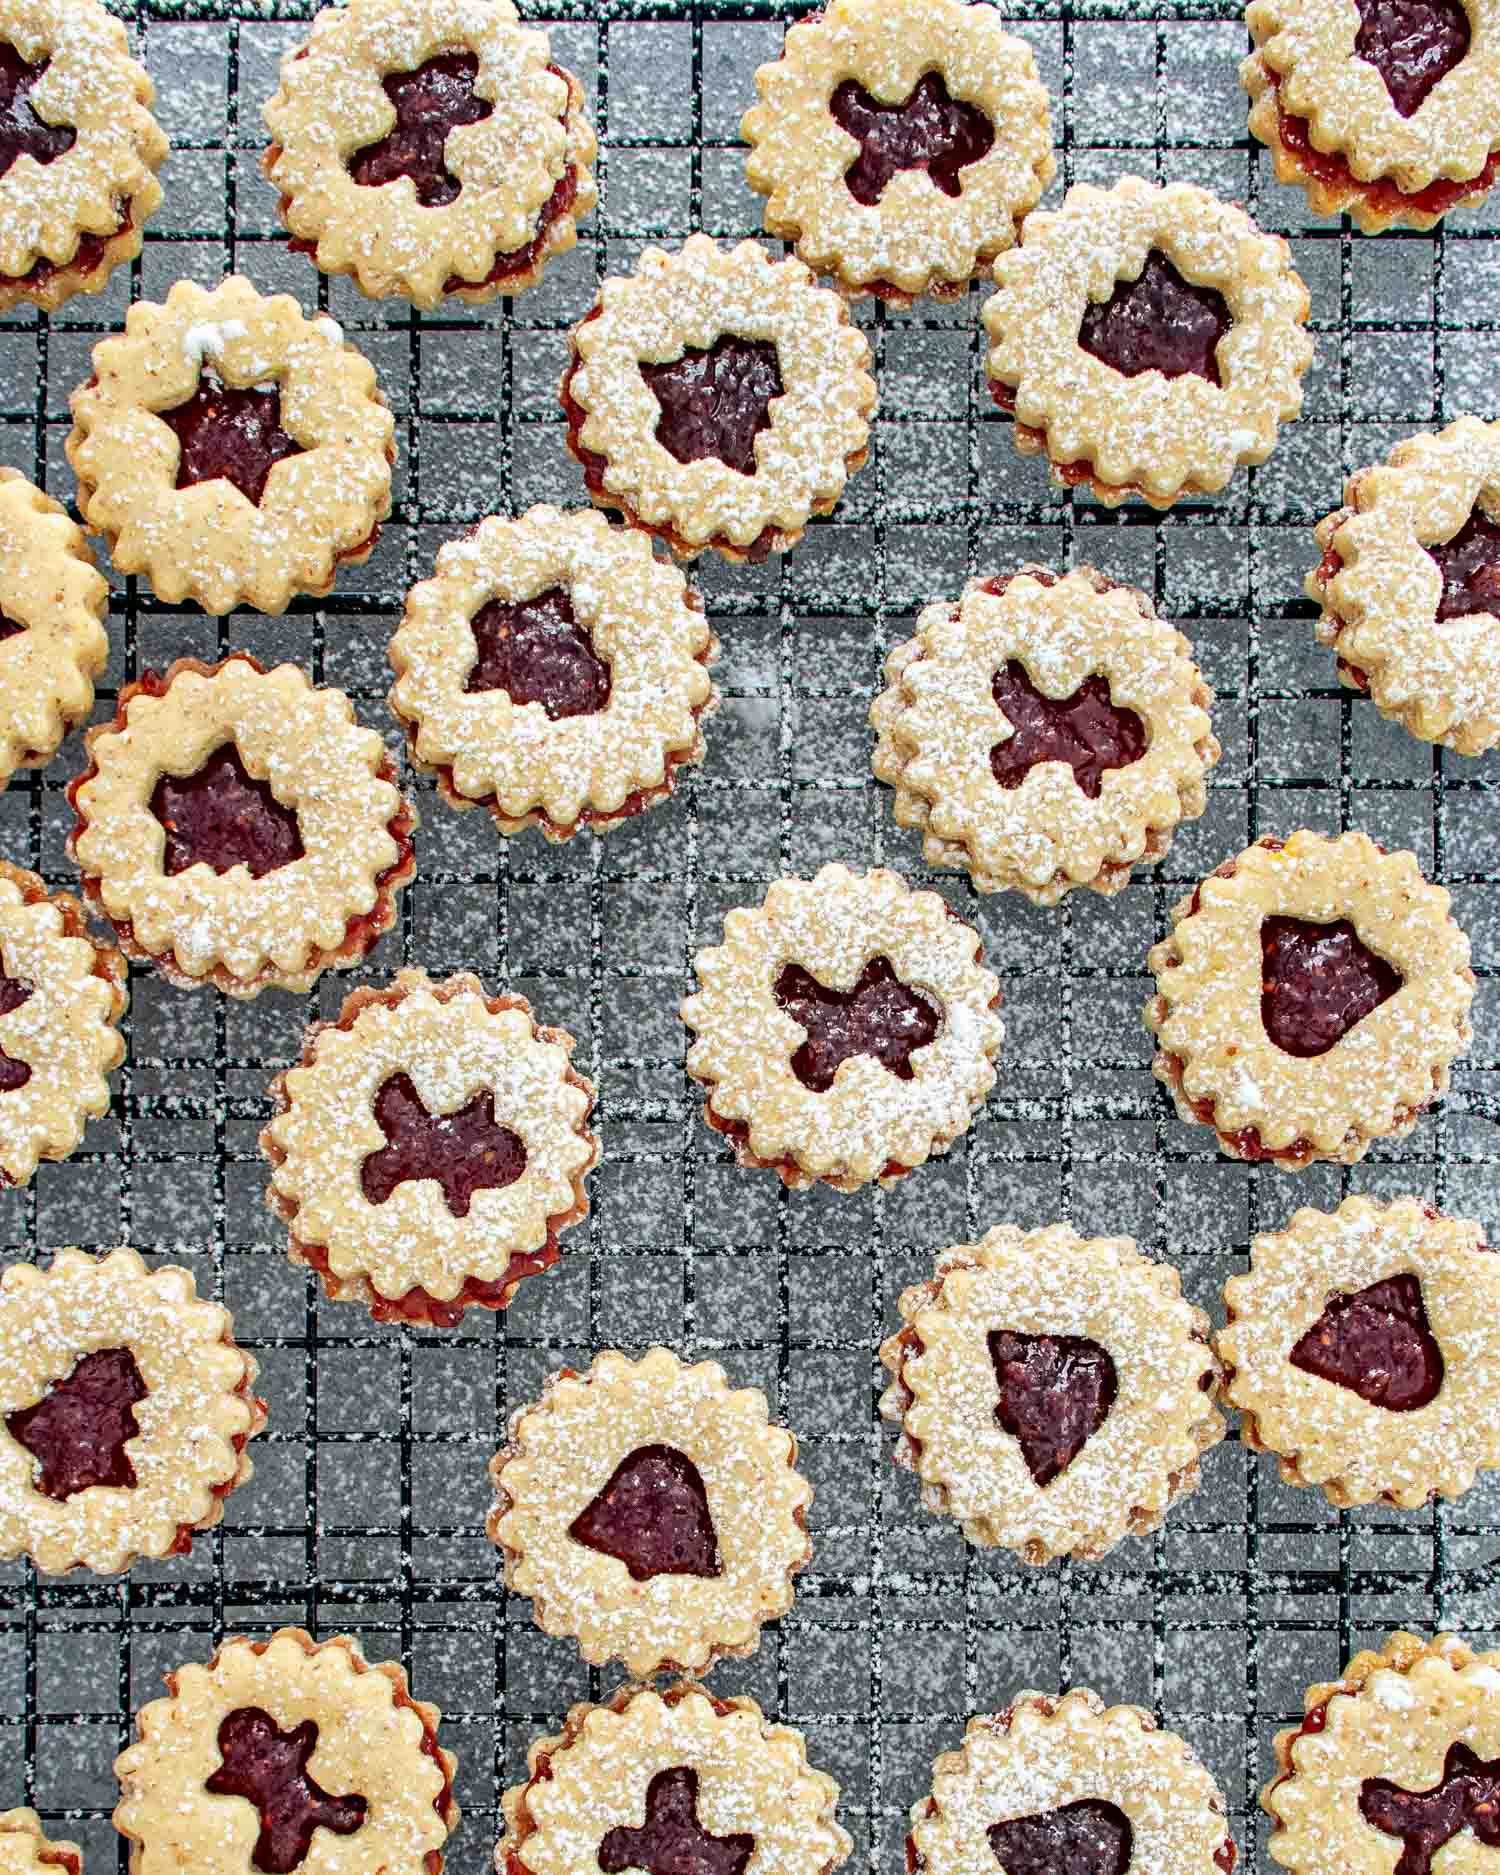 linzer cookies cooling on a cooling rack.